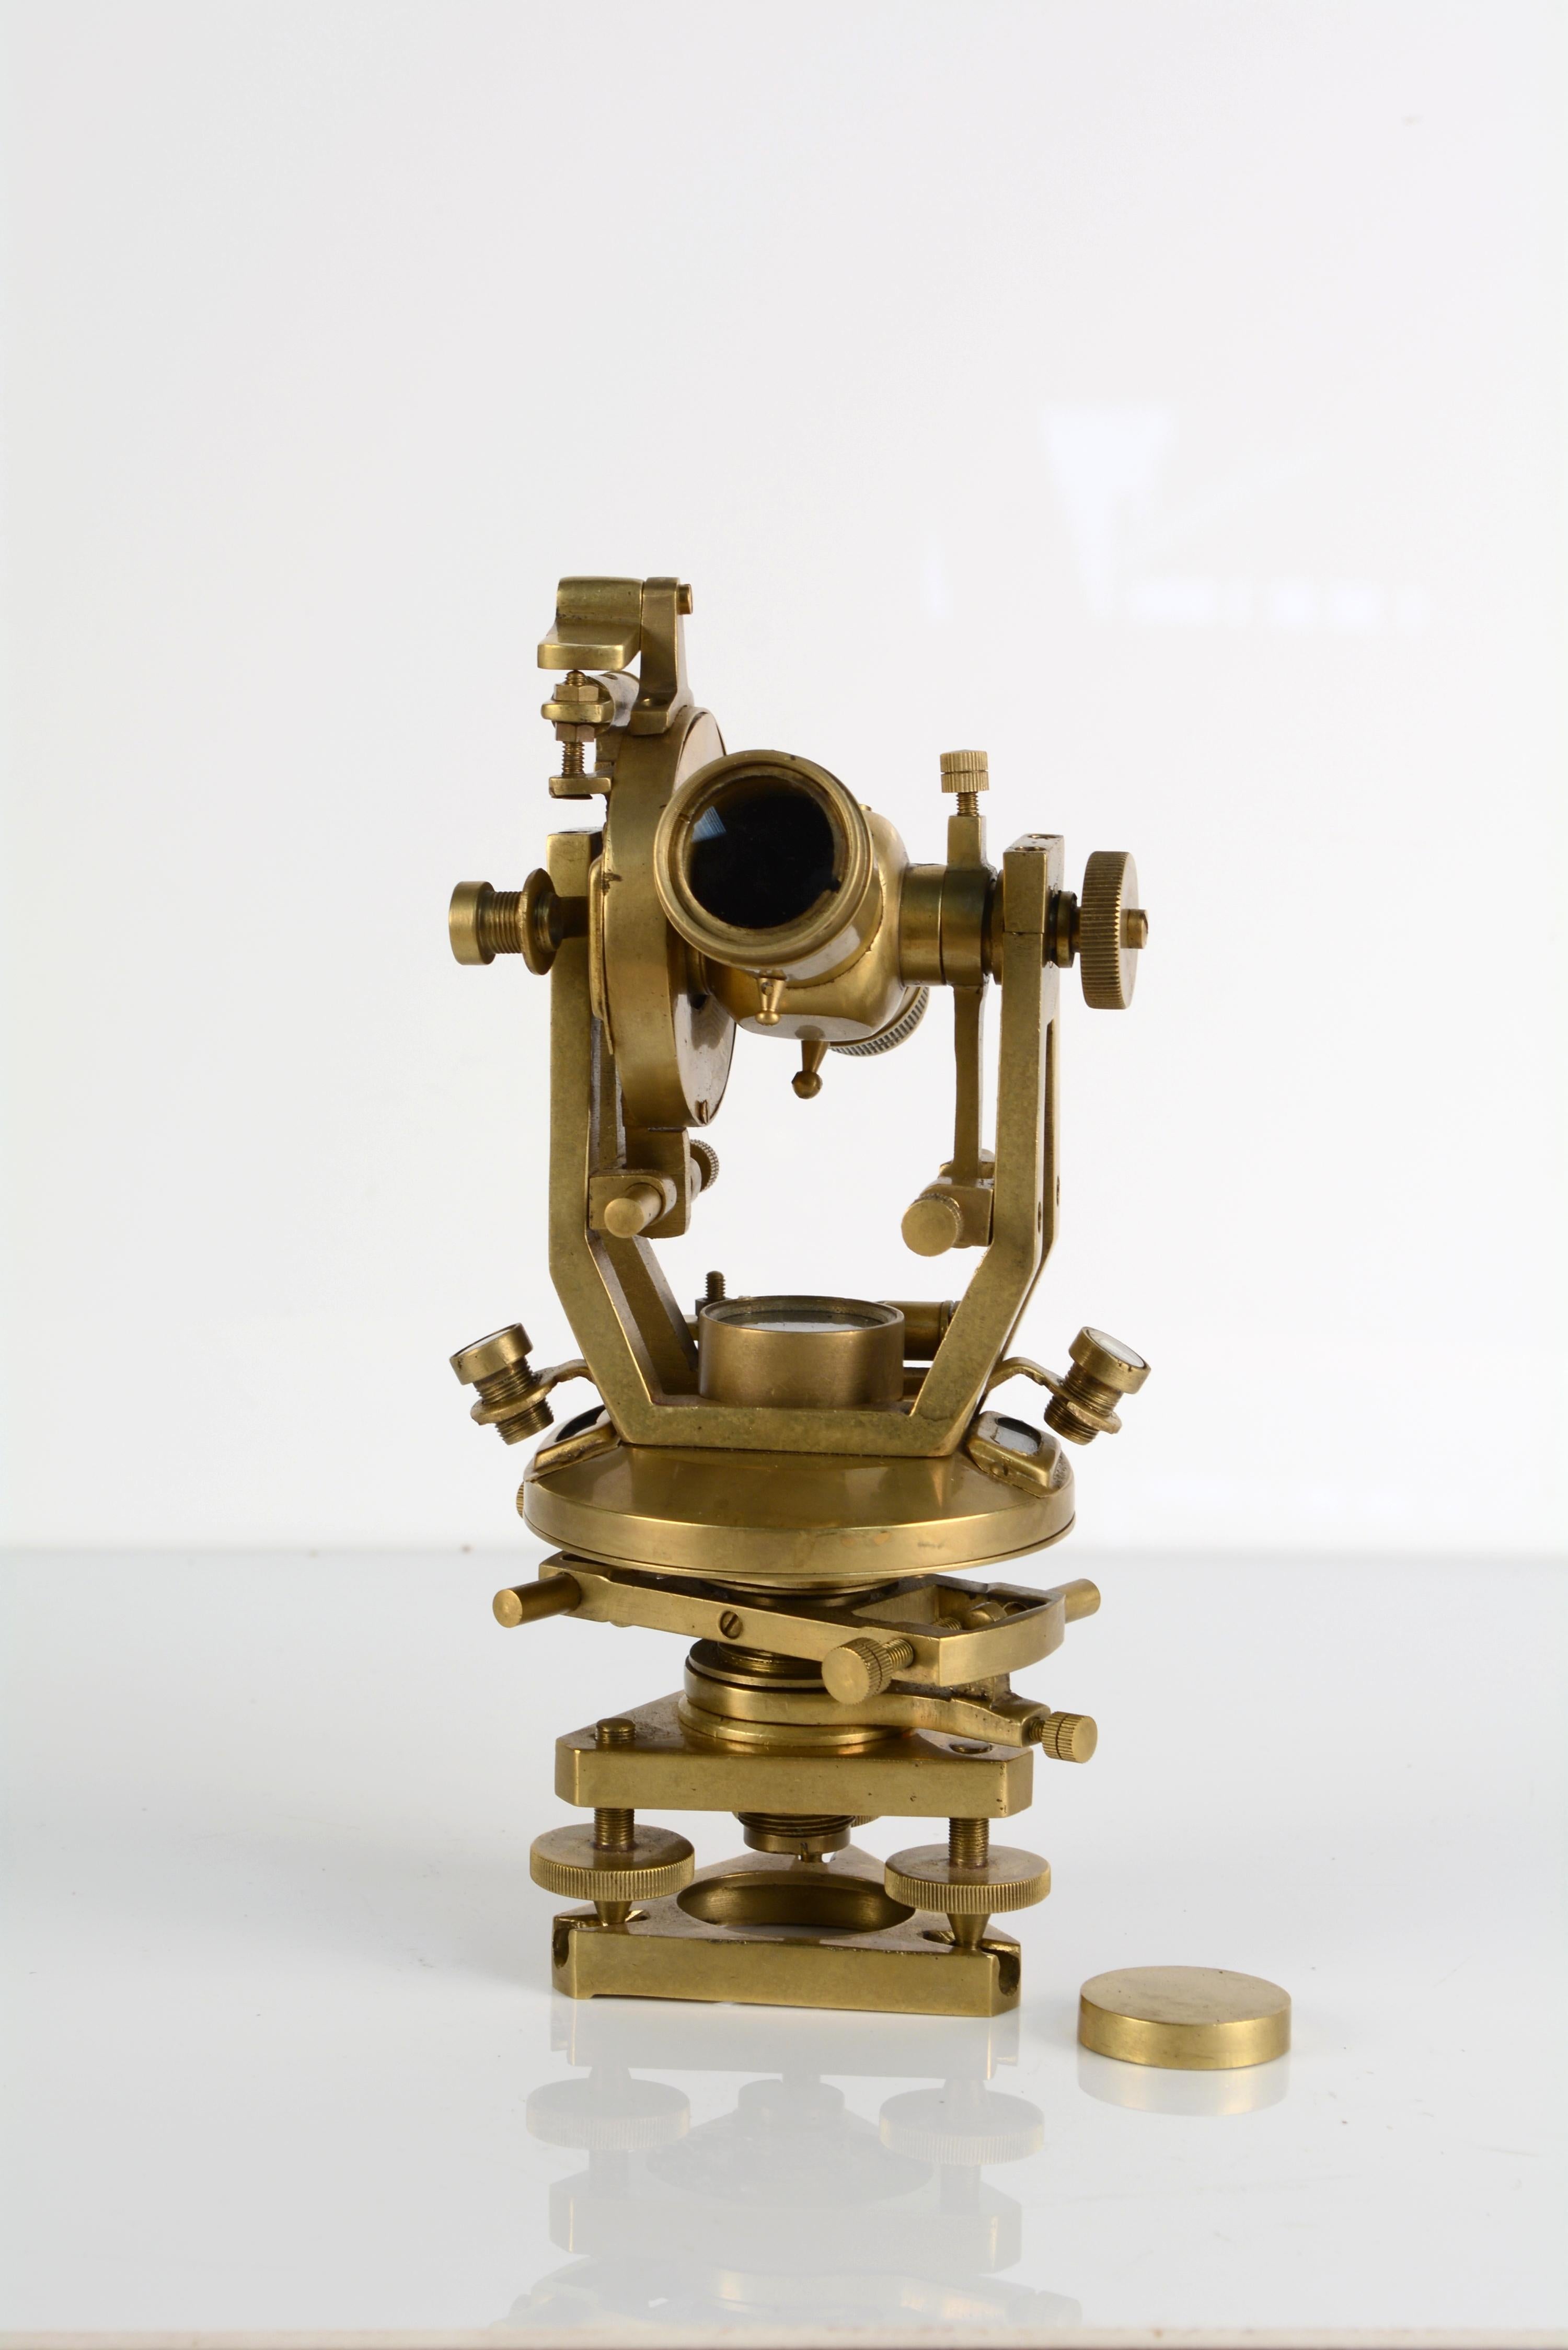 Theodolite in bronze. Non-functional decorative use, 20th century
The theodolite is a universal mechanical-optical measuring instrument used to measure vertical and, above all, horizontal angles, an area in which it has high precision. With other